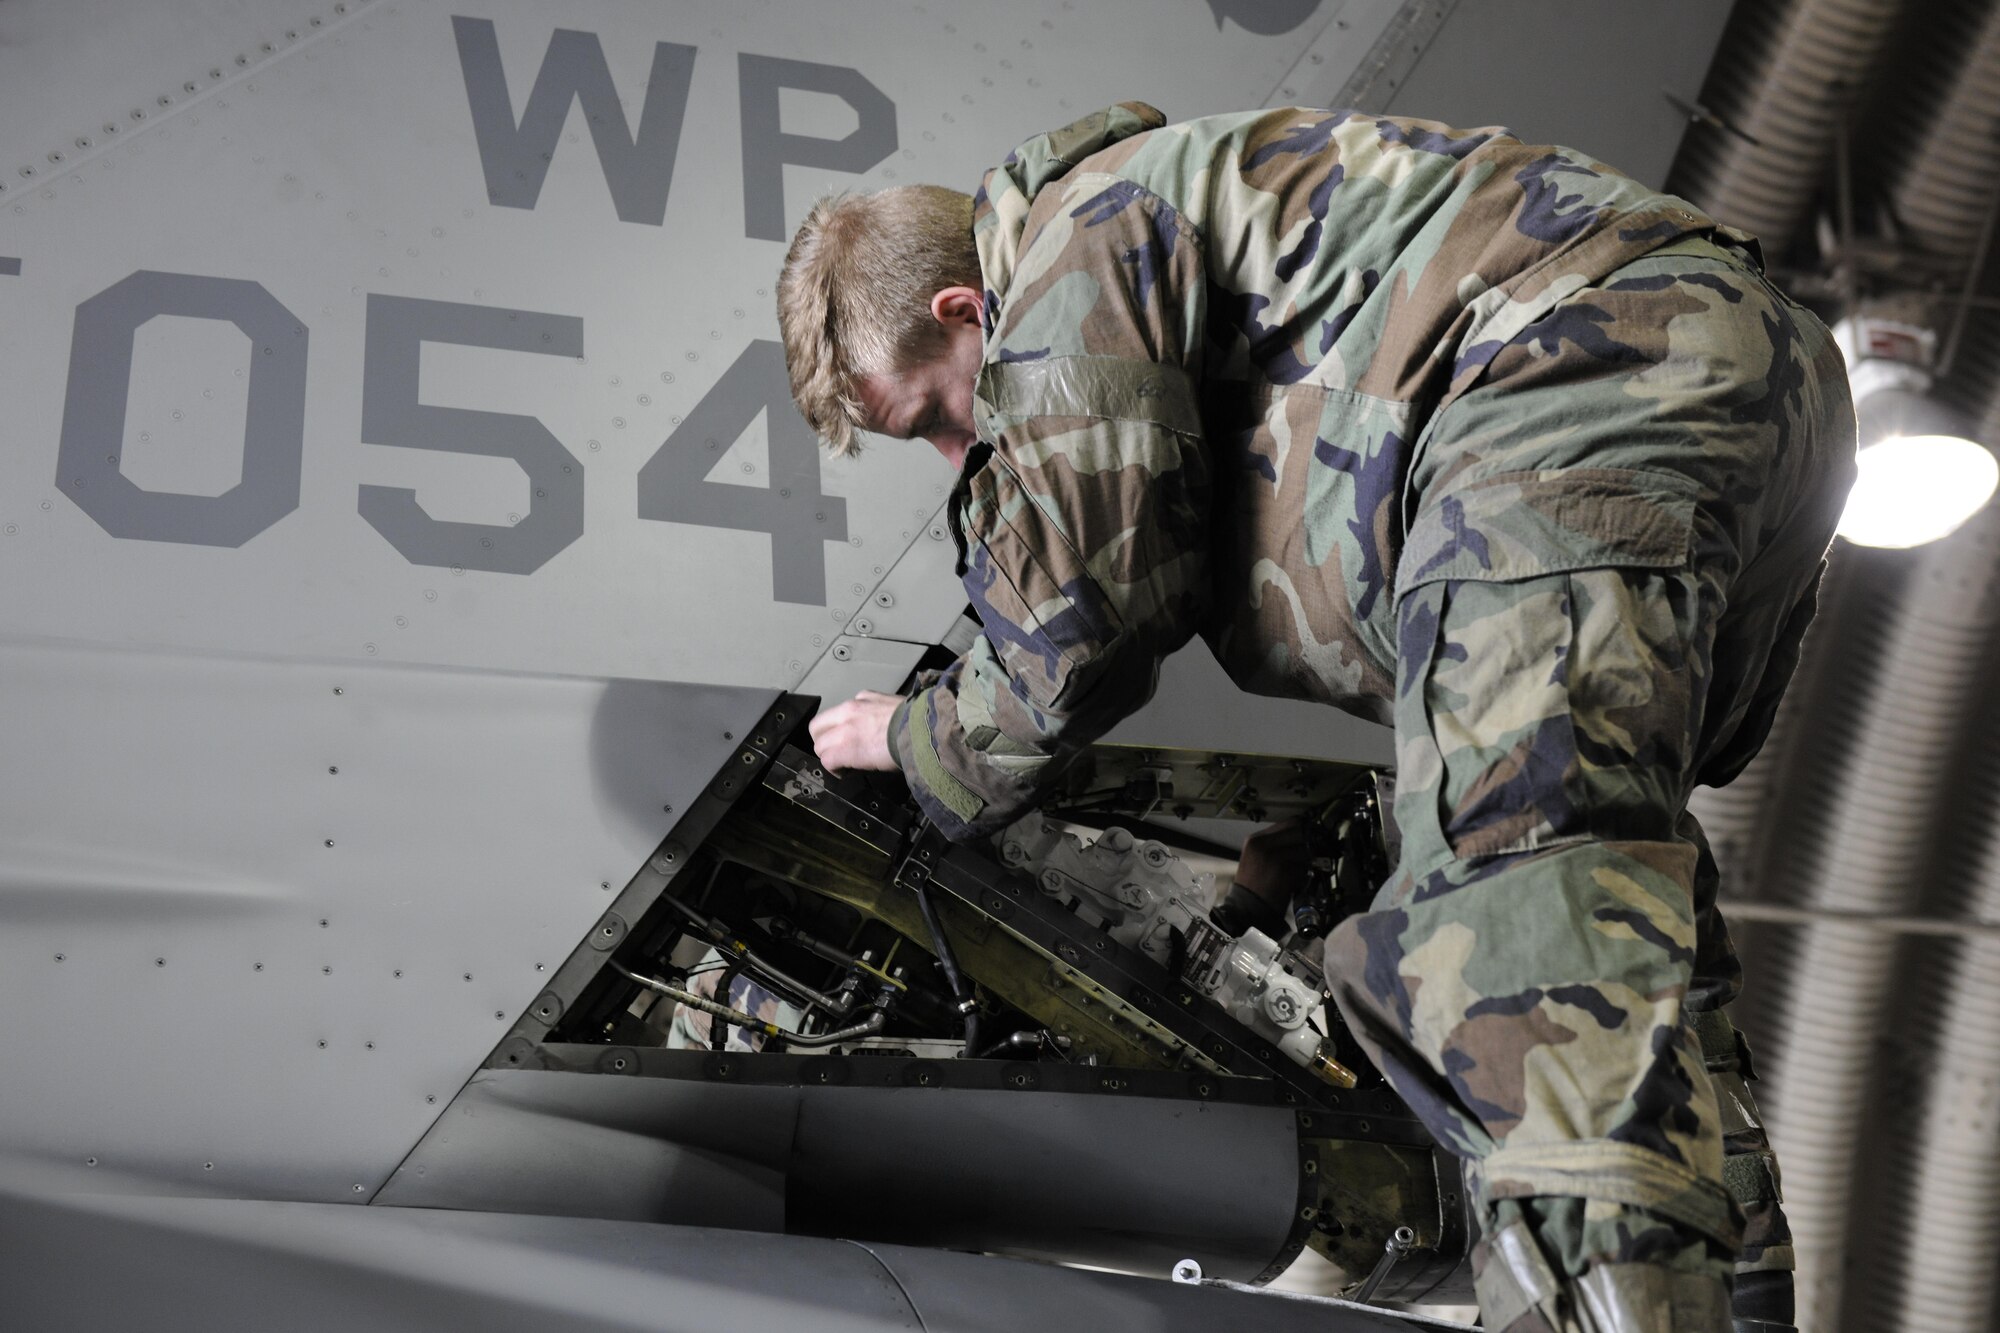 Staff Sgt. Brandon Rauchy, 80th Aircraft Maintenance Squadron dedicated crew chief, works on removing a rudder servo actuator on an F-16 Fighting Falcon during Beverly Pack 16-2 at Kunsan Air Base, Republic of Korea, Feb. 3, 2015. Airmen work around the clock no matter the condition during the exercises here on Kunsan. (U.S. Air Force photo by Senior Airman Dustin King/Released)